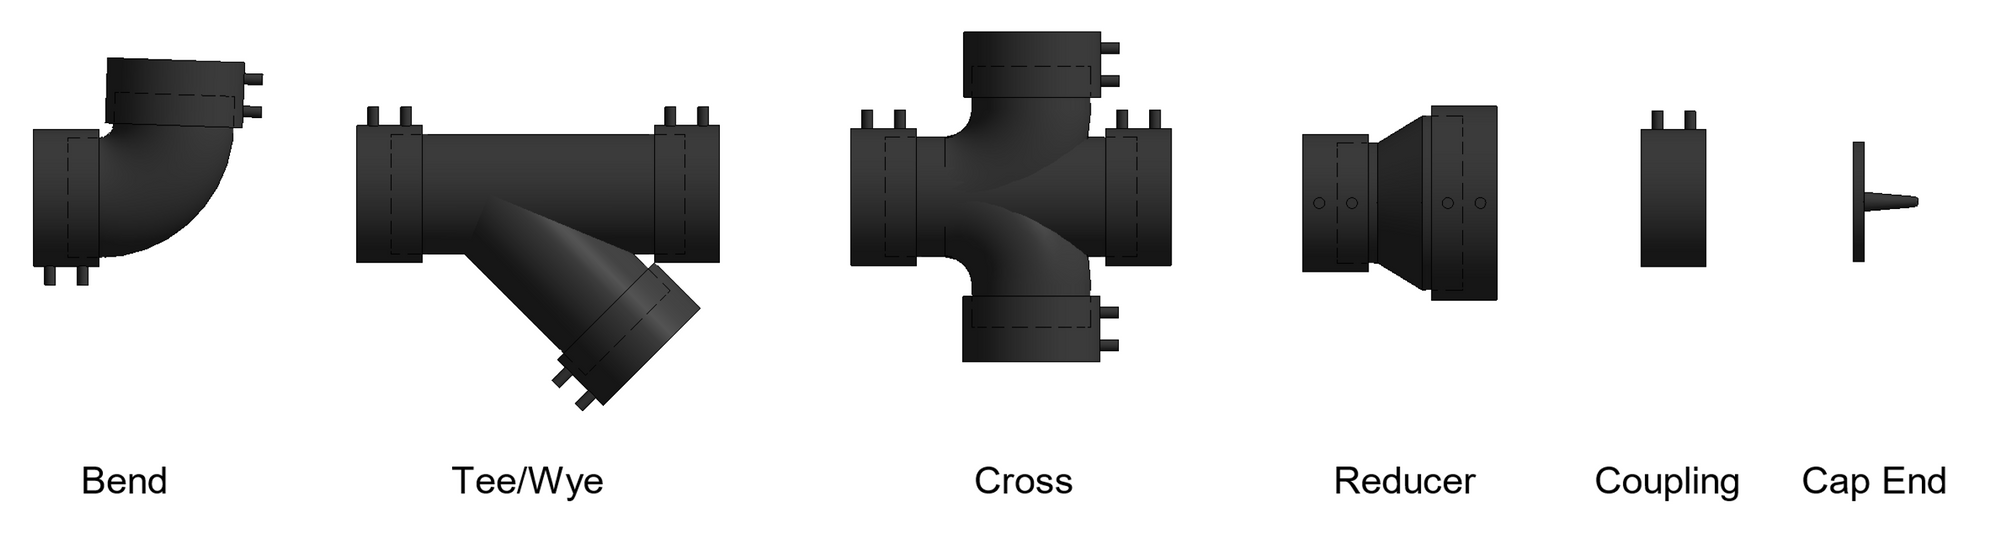 Image showing pipe fittings available in the routing preference.